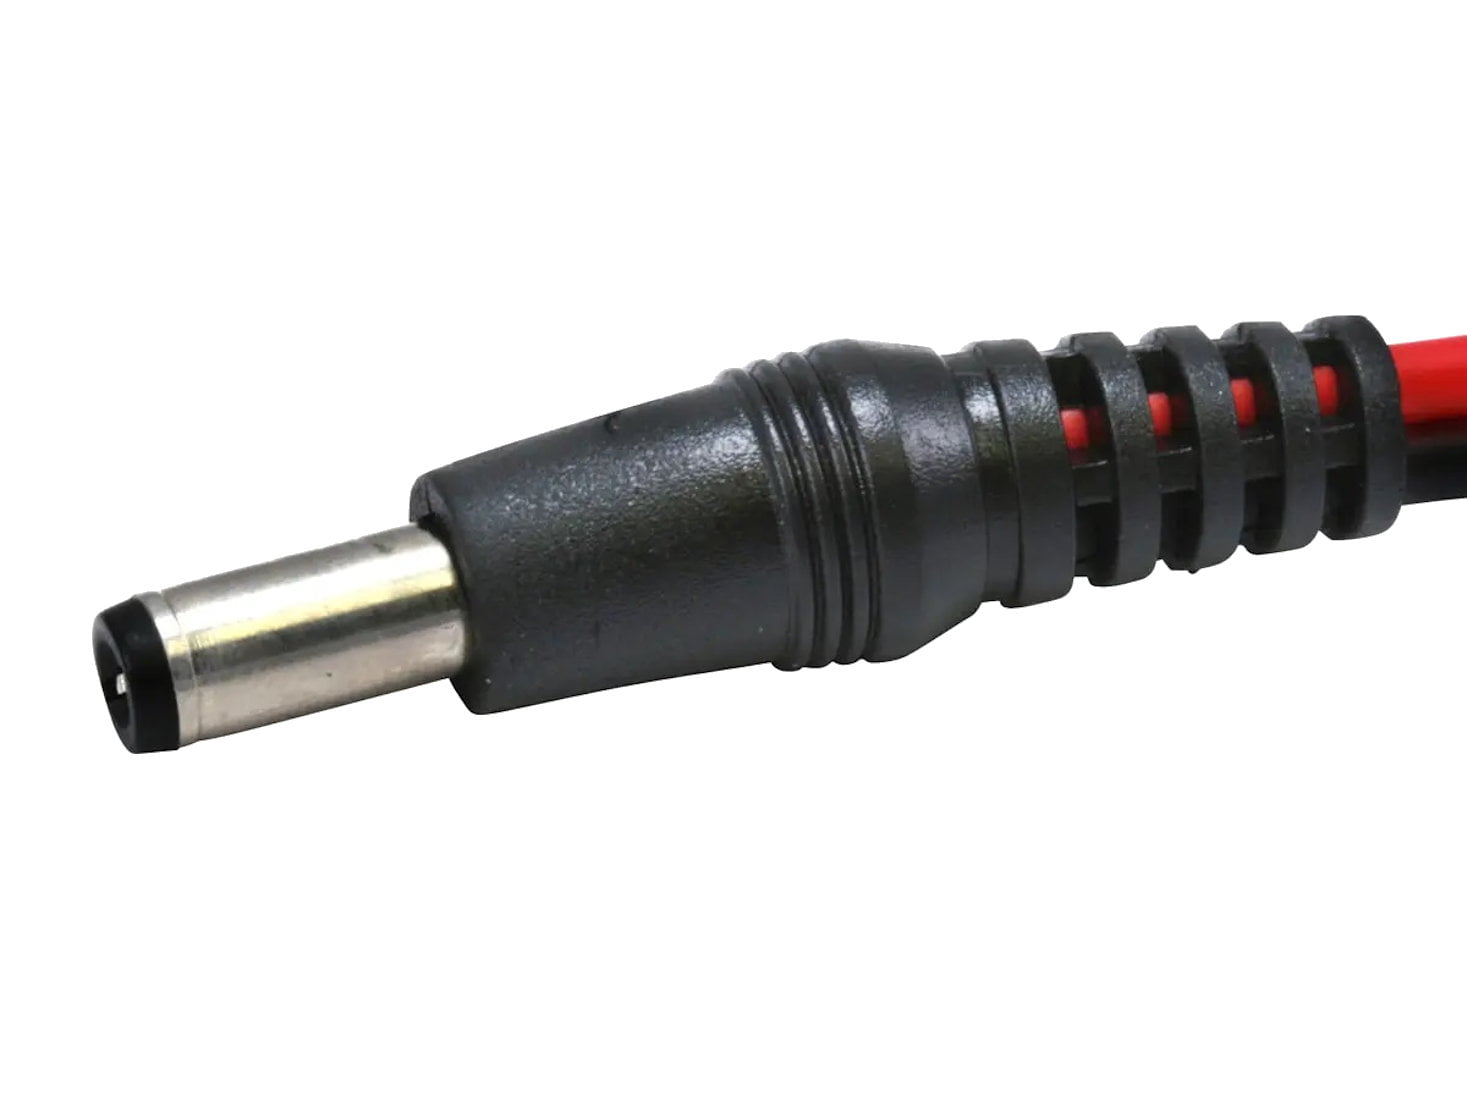 TR-PIGTAIL DC 2.1 × 5.5mm Male Power Plug Pigtail for CCTV Security Systems Plug